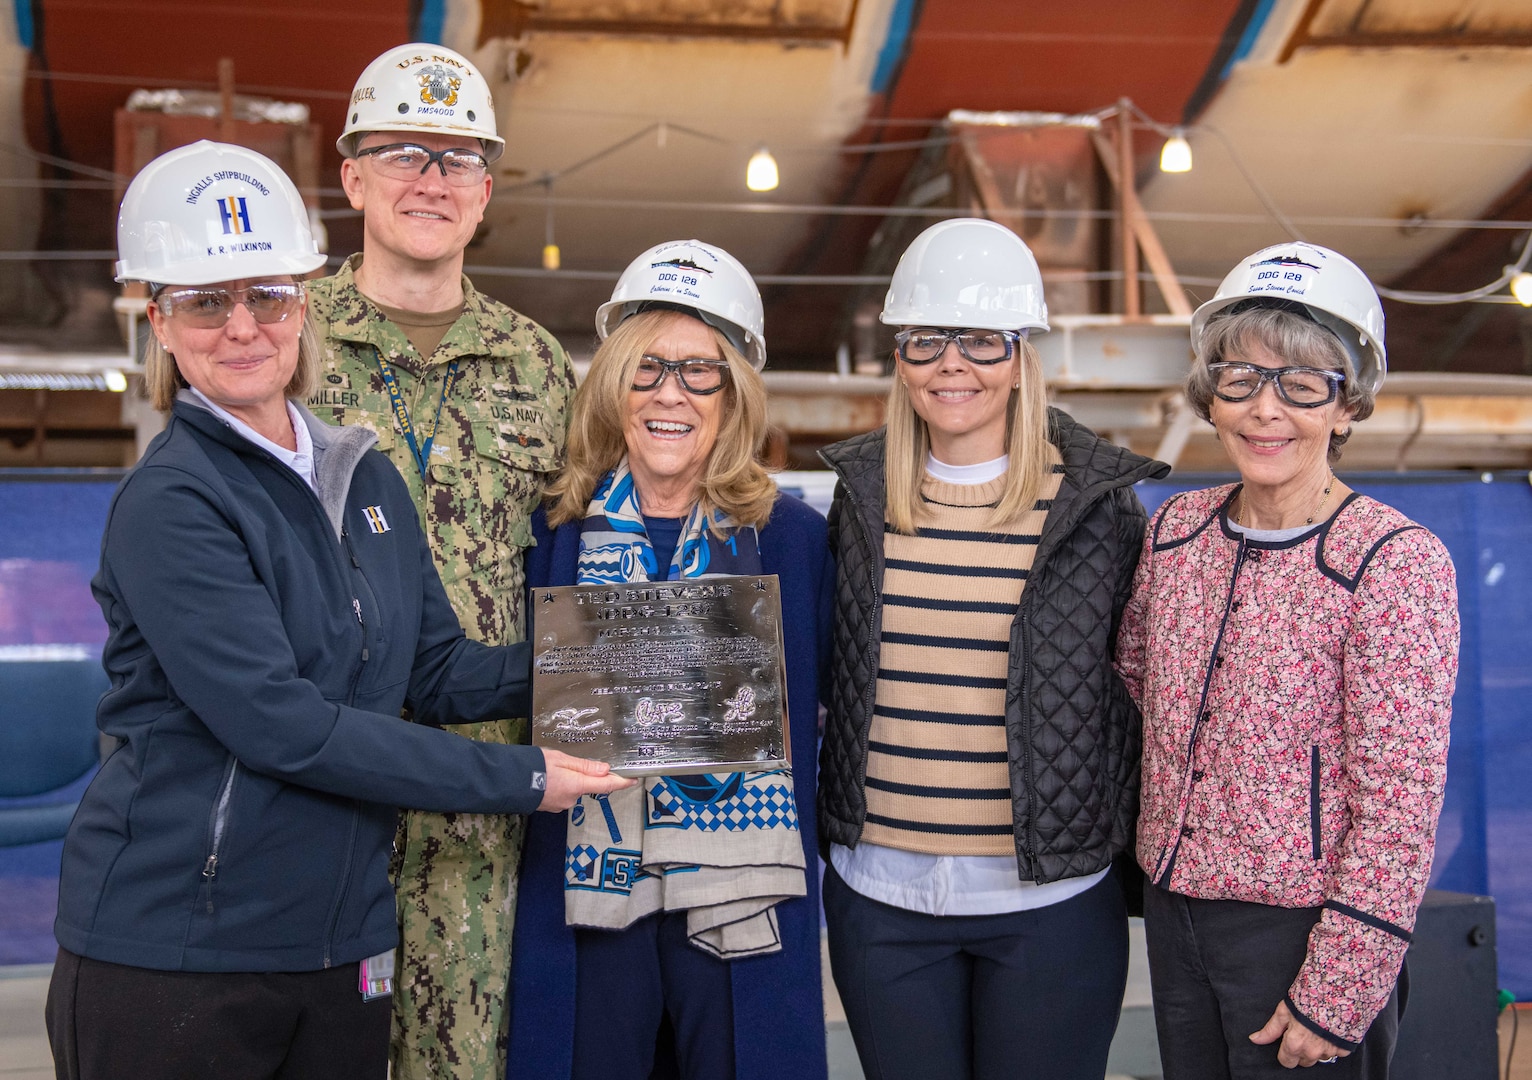 The keel of future USS Ted Stevens (DDG 128), the 78th Arleigh Burke-class ship was ceremonially laid at Huntington Ingalls Industries (HII) Ingalls Shipbuilding, March 9.